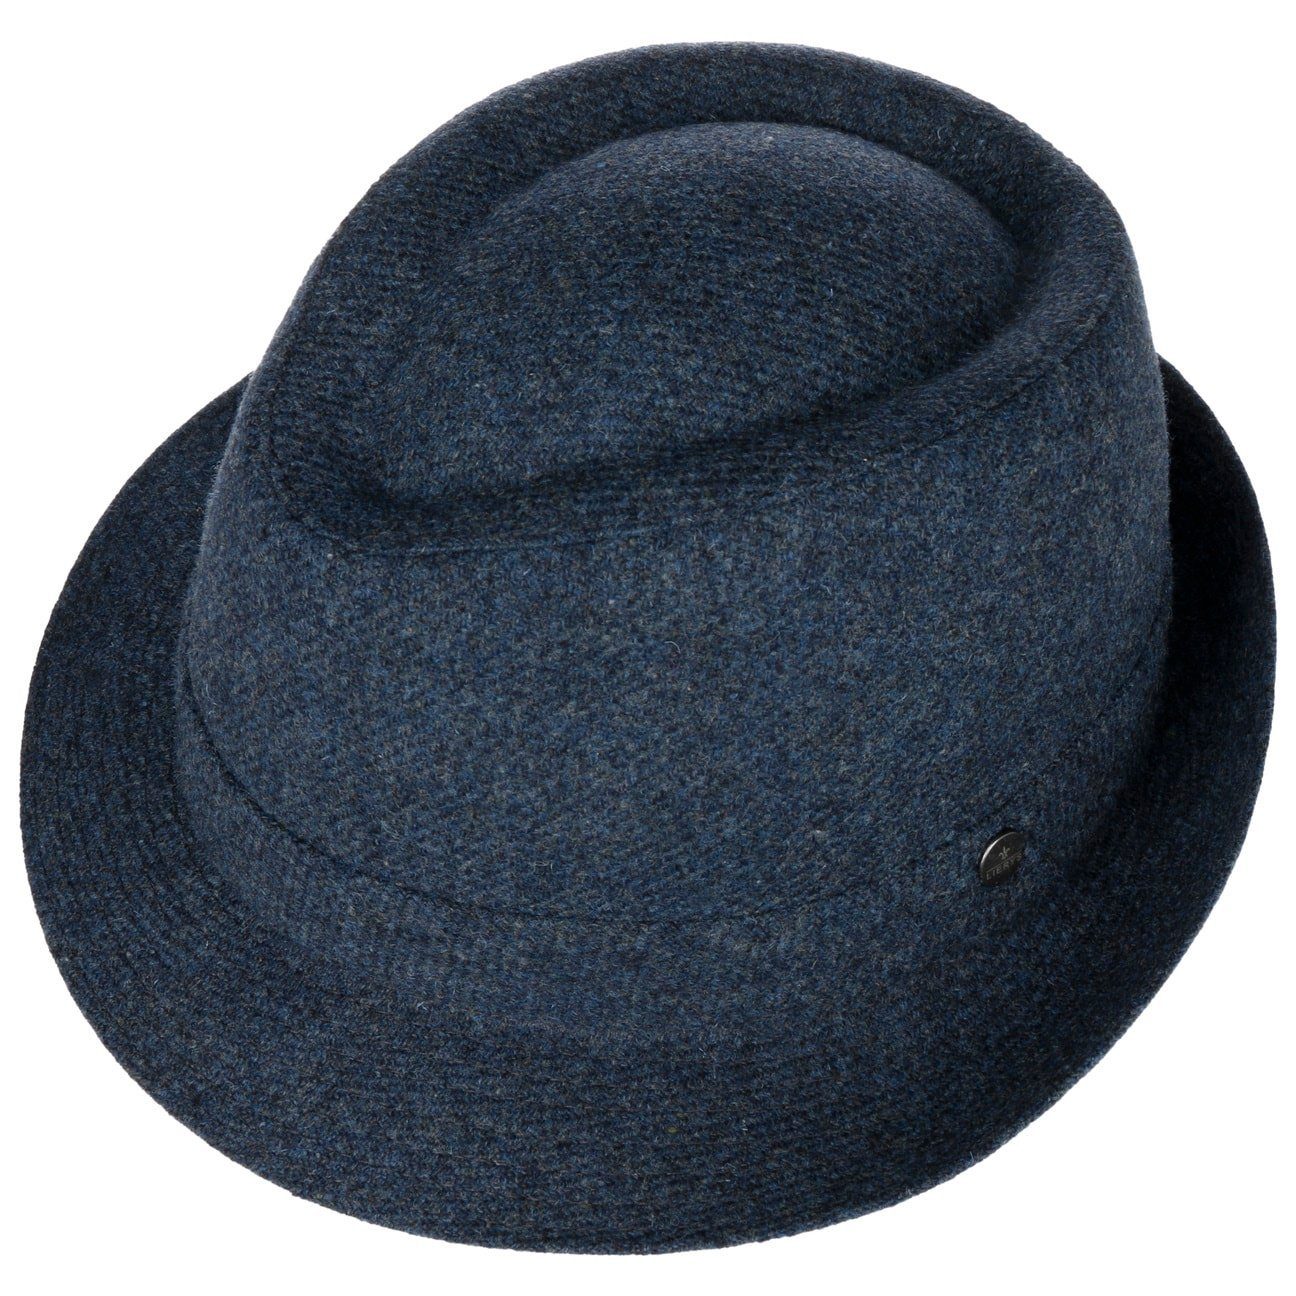 Lierys Trilby (1-St) Wolltrilby mit blau Italy Made Futter, in